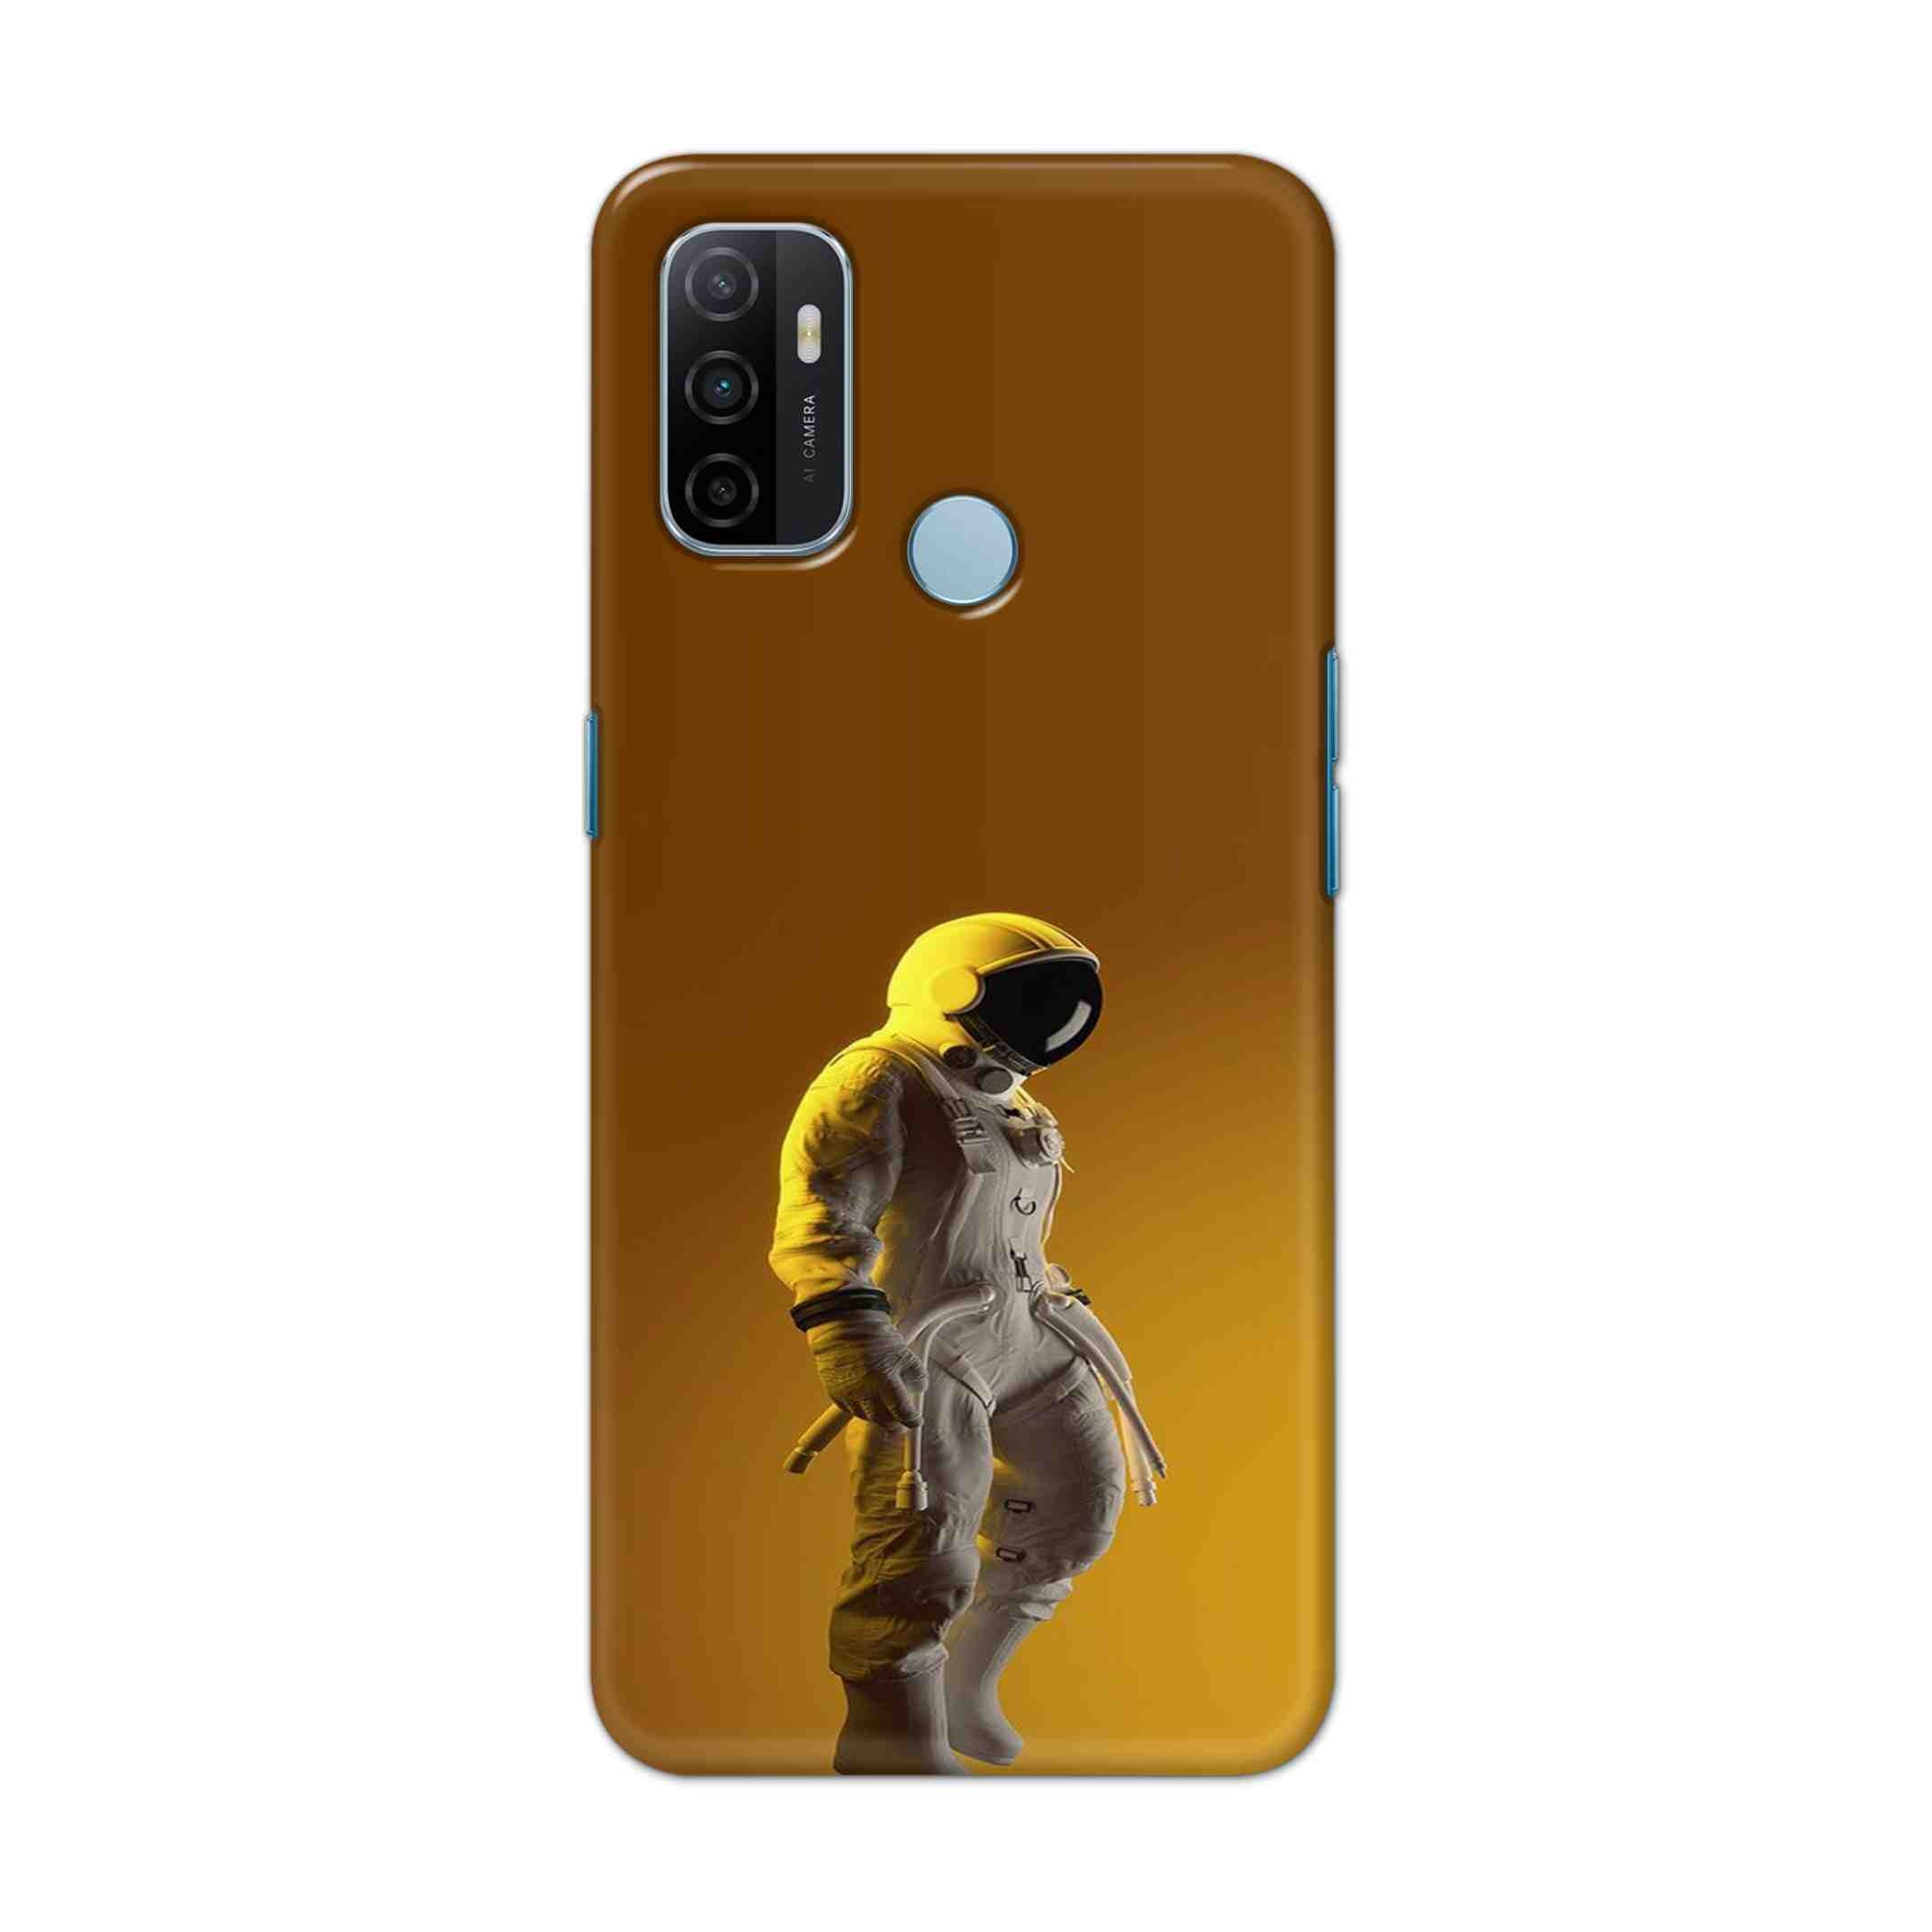 Buy Yellow Astronaut Hard Back Mobile Phone Case Cover For OPPO A53 (2020) Online